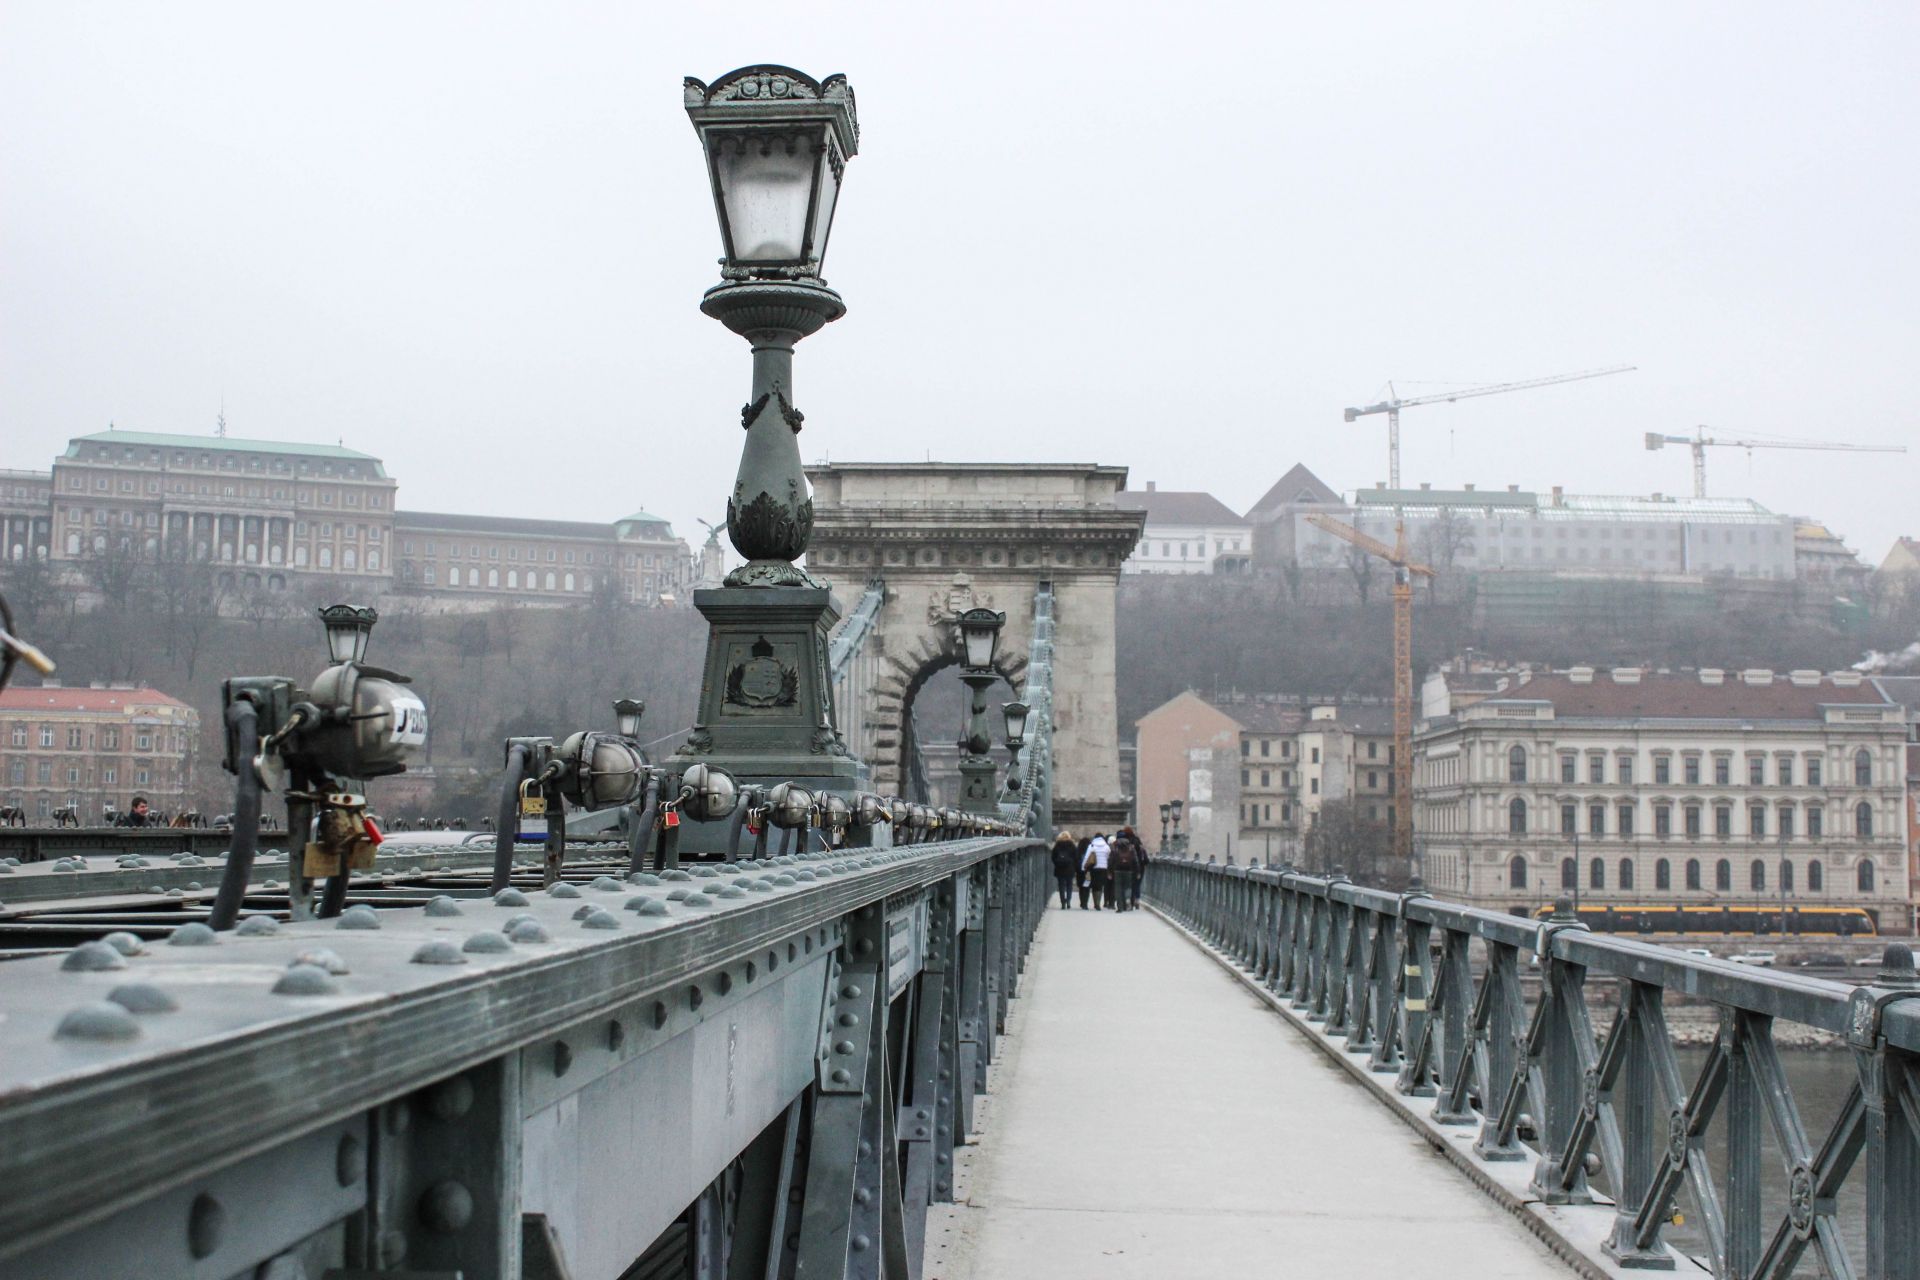 From Pest to Buda – Walking the Chain Bridge in Budapest